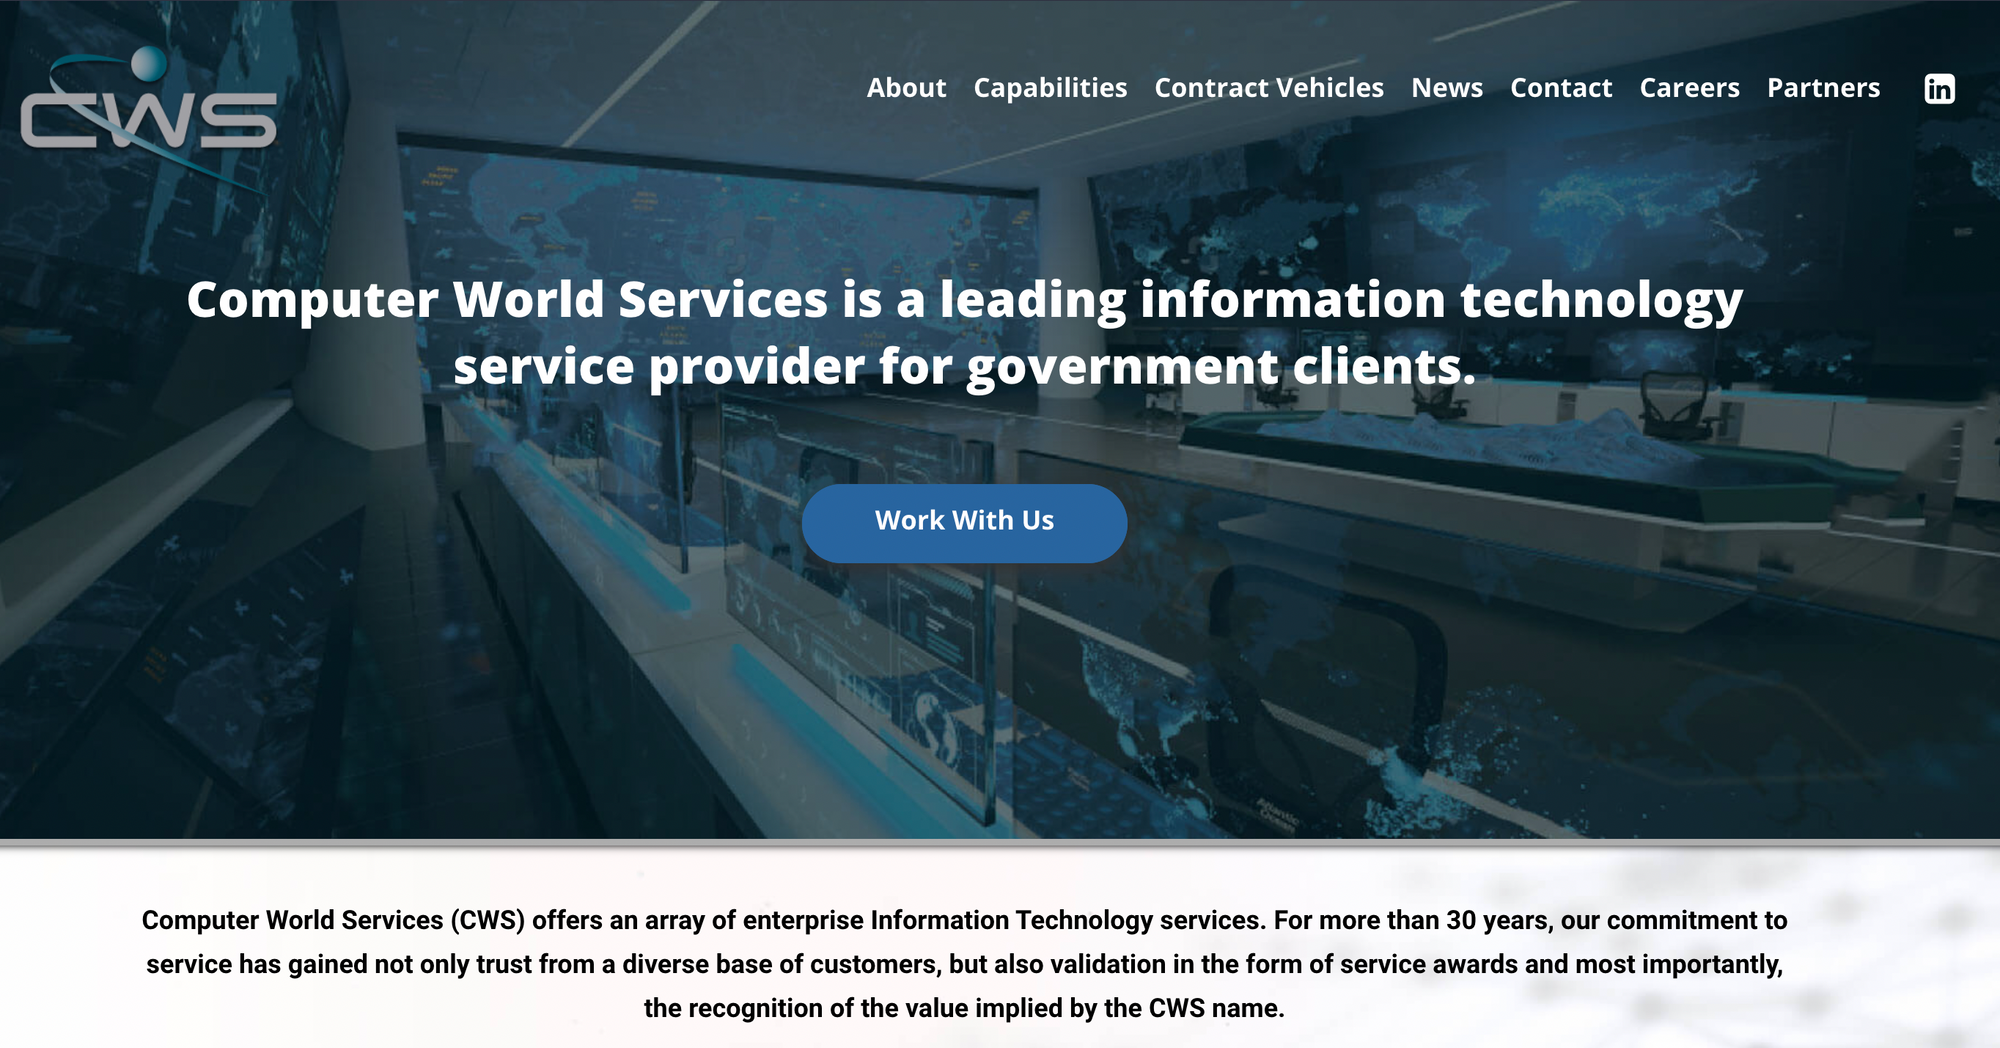 Website of Computer World Services Corp